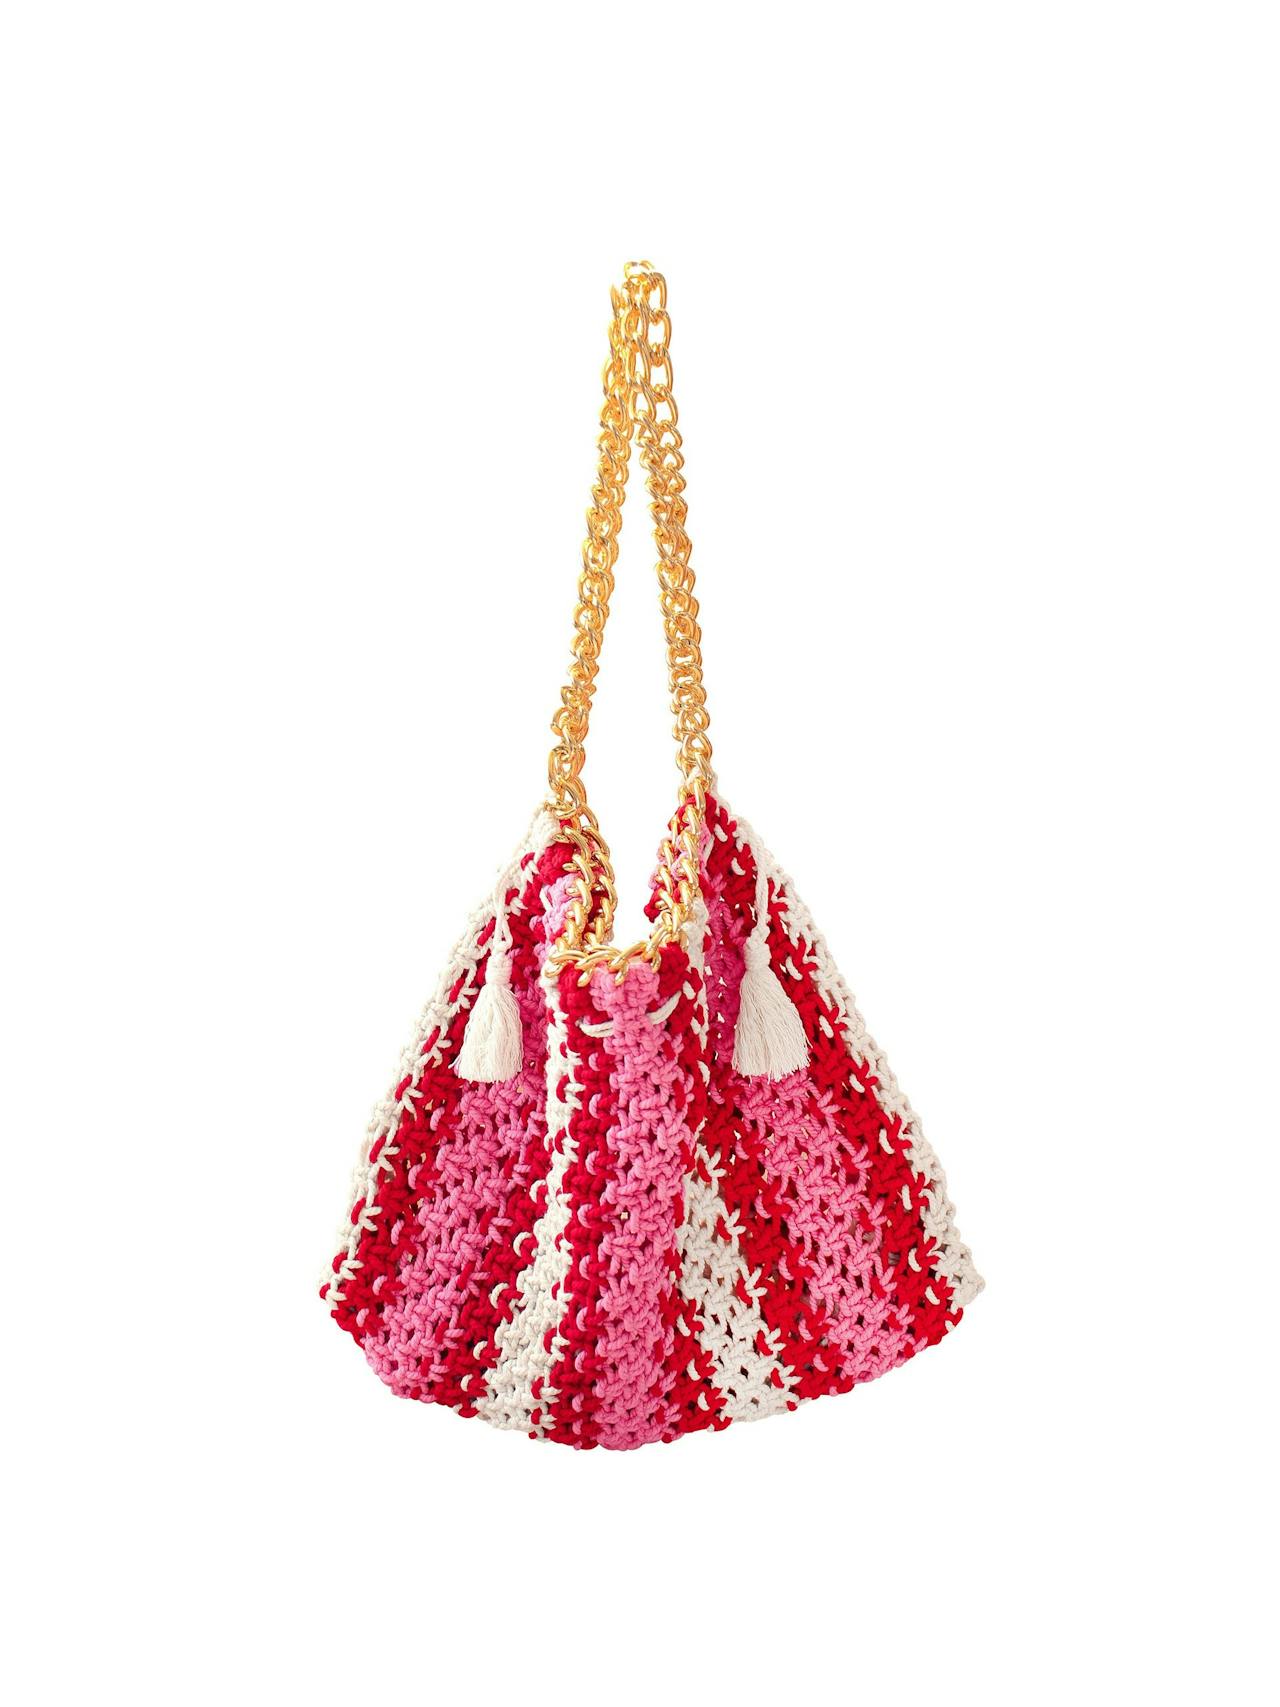 Colette macrame beach bag in pink and red